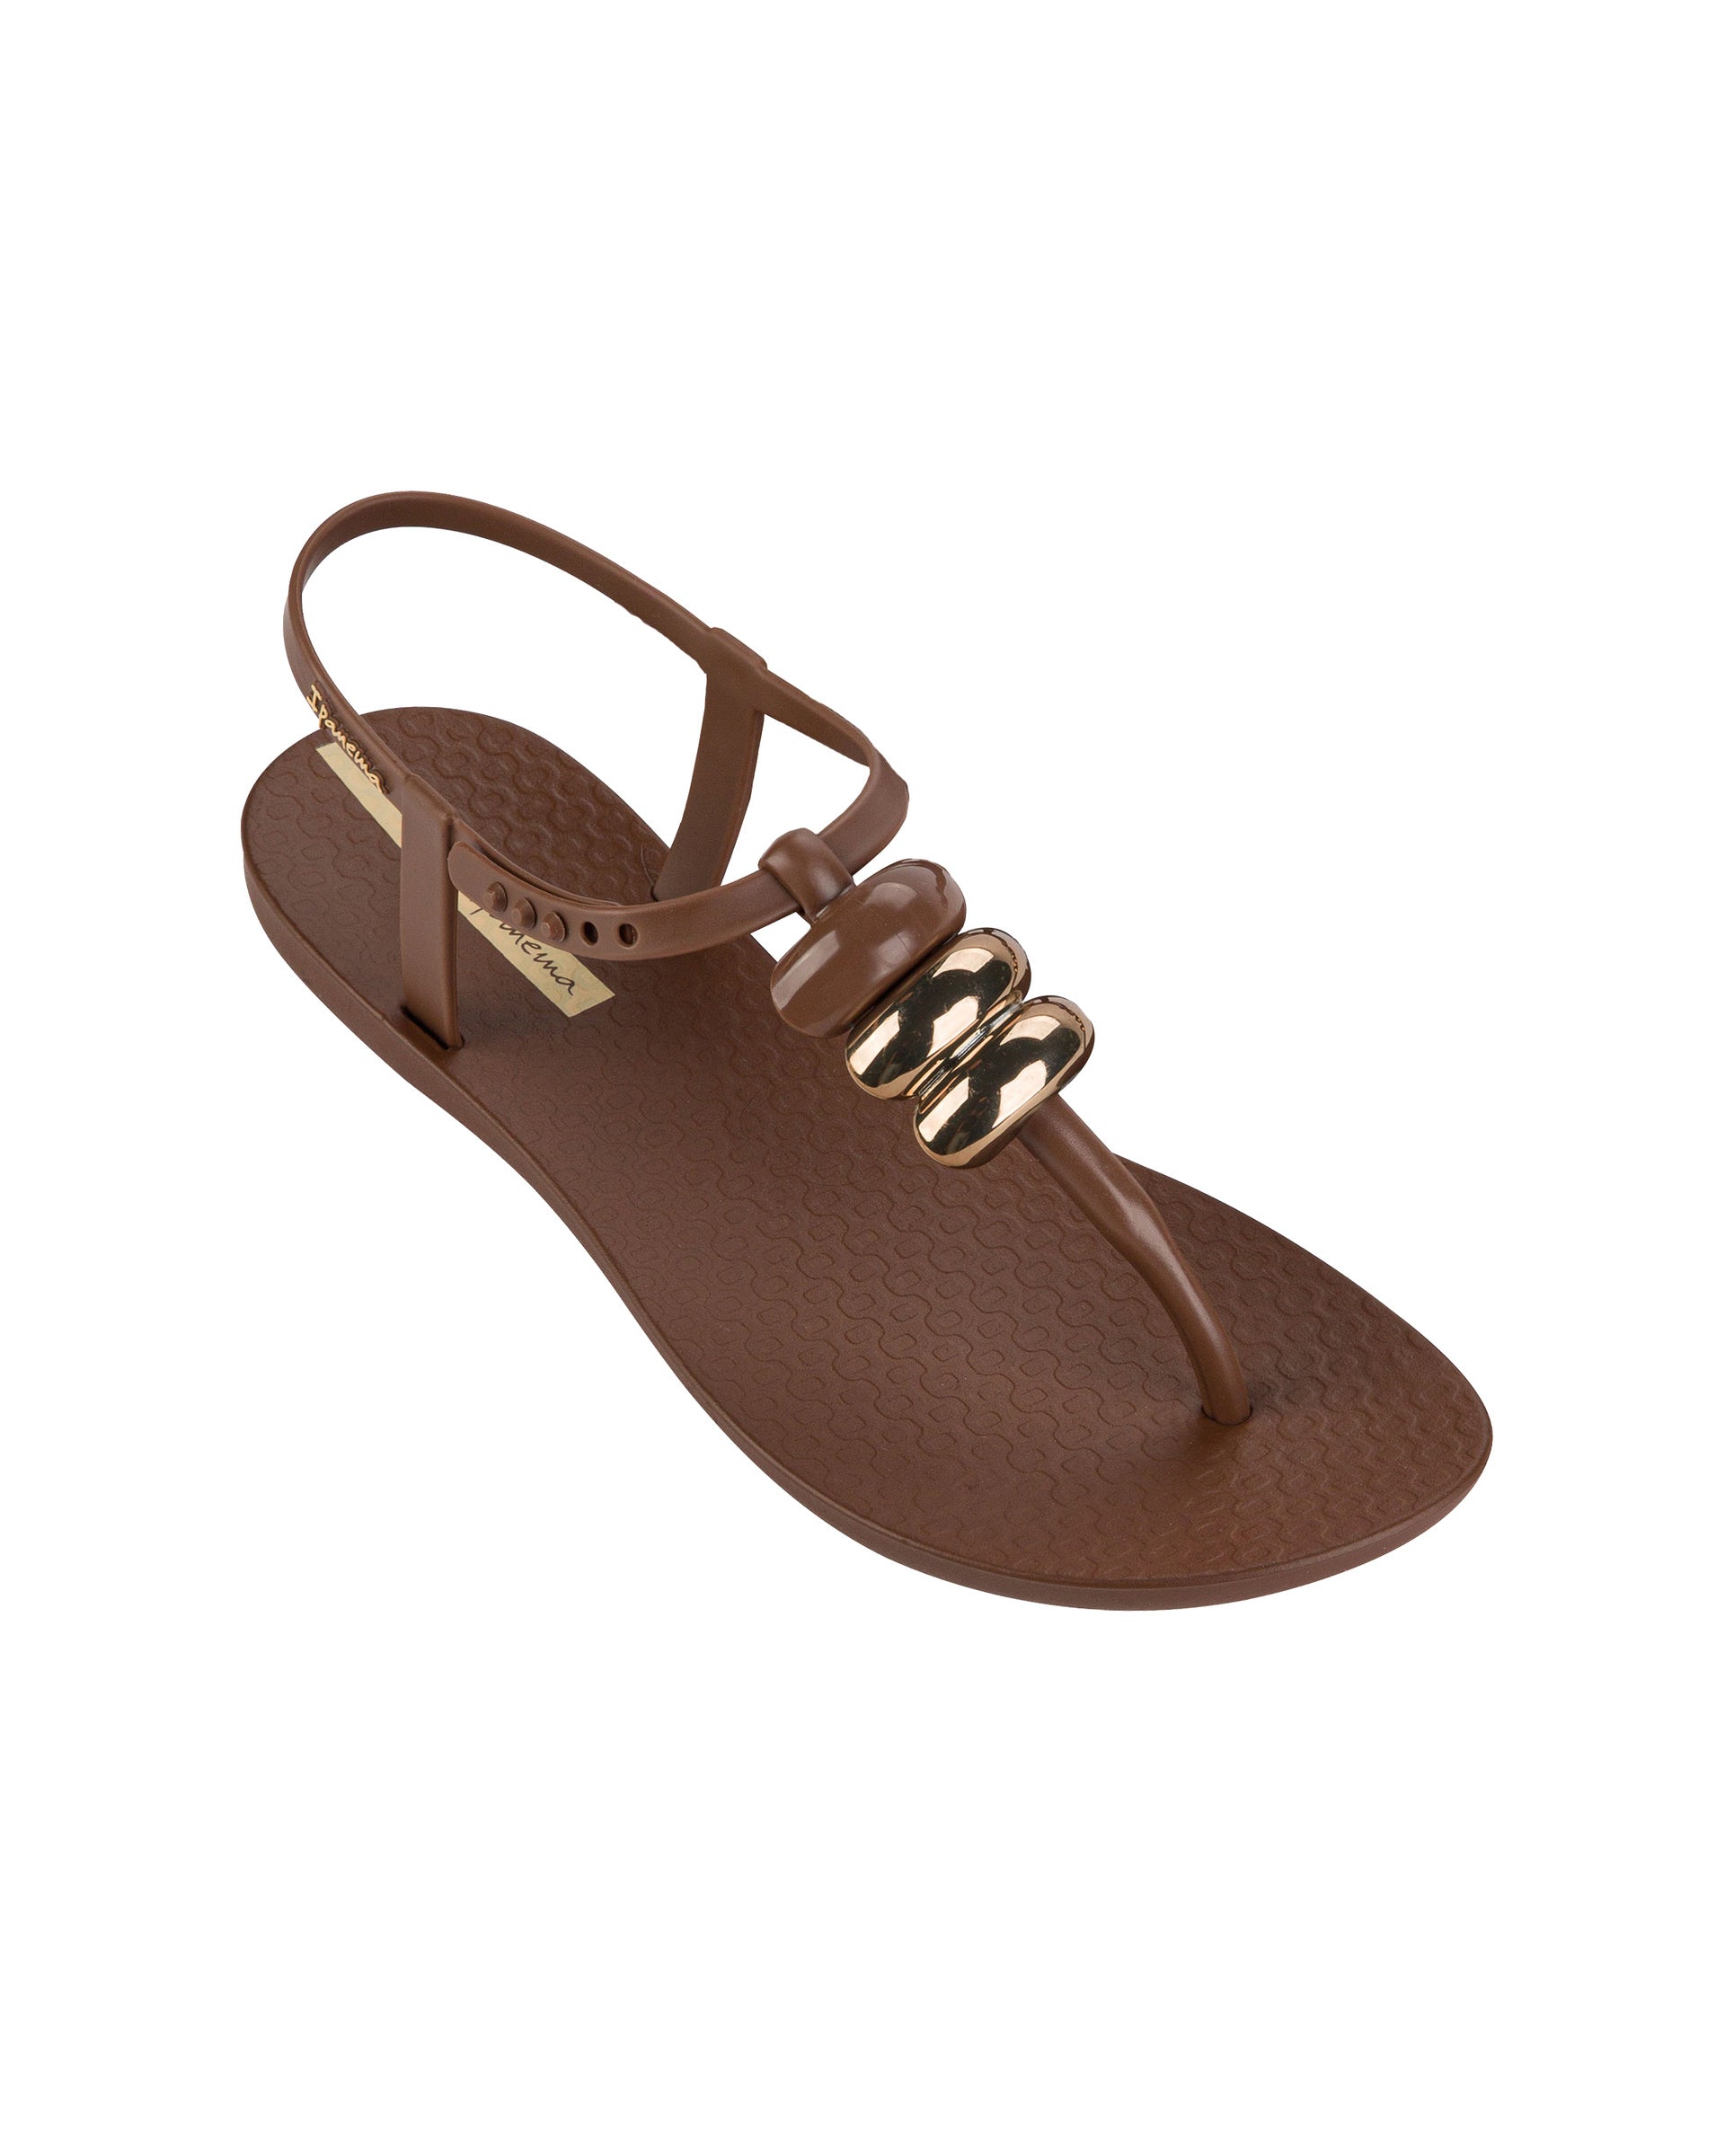 Angled view of a brown Ipanema Class women's sandal with 3 bubble baubles on the t-strap.